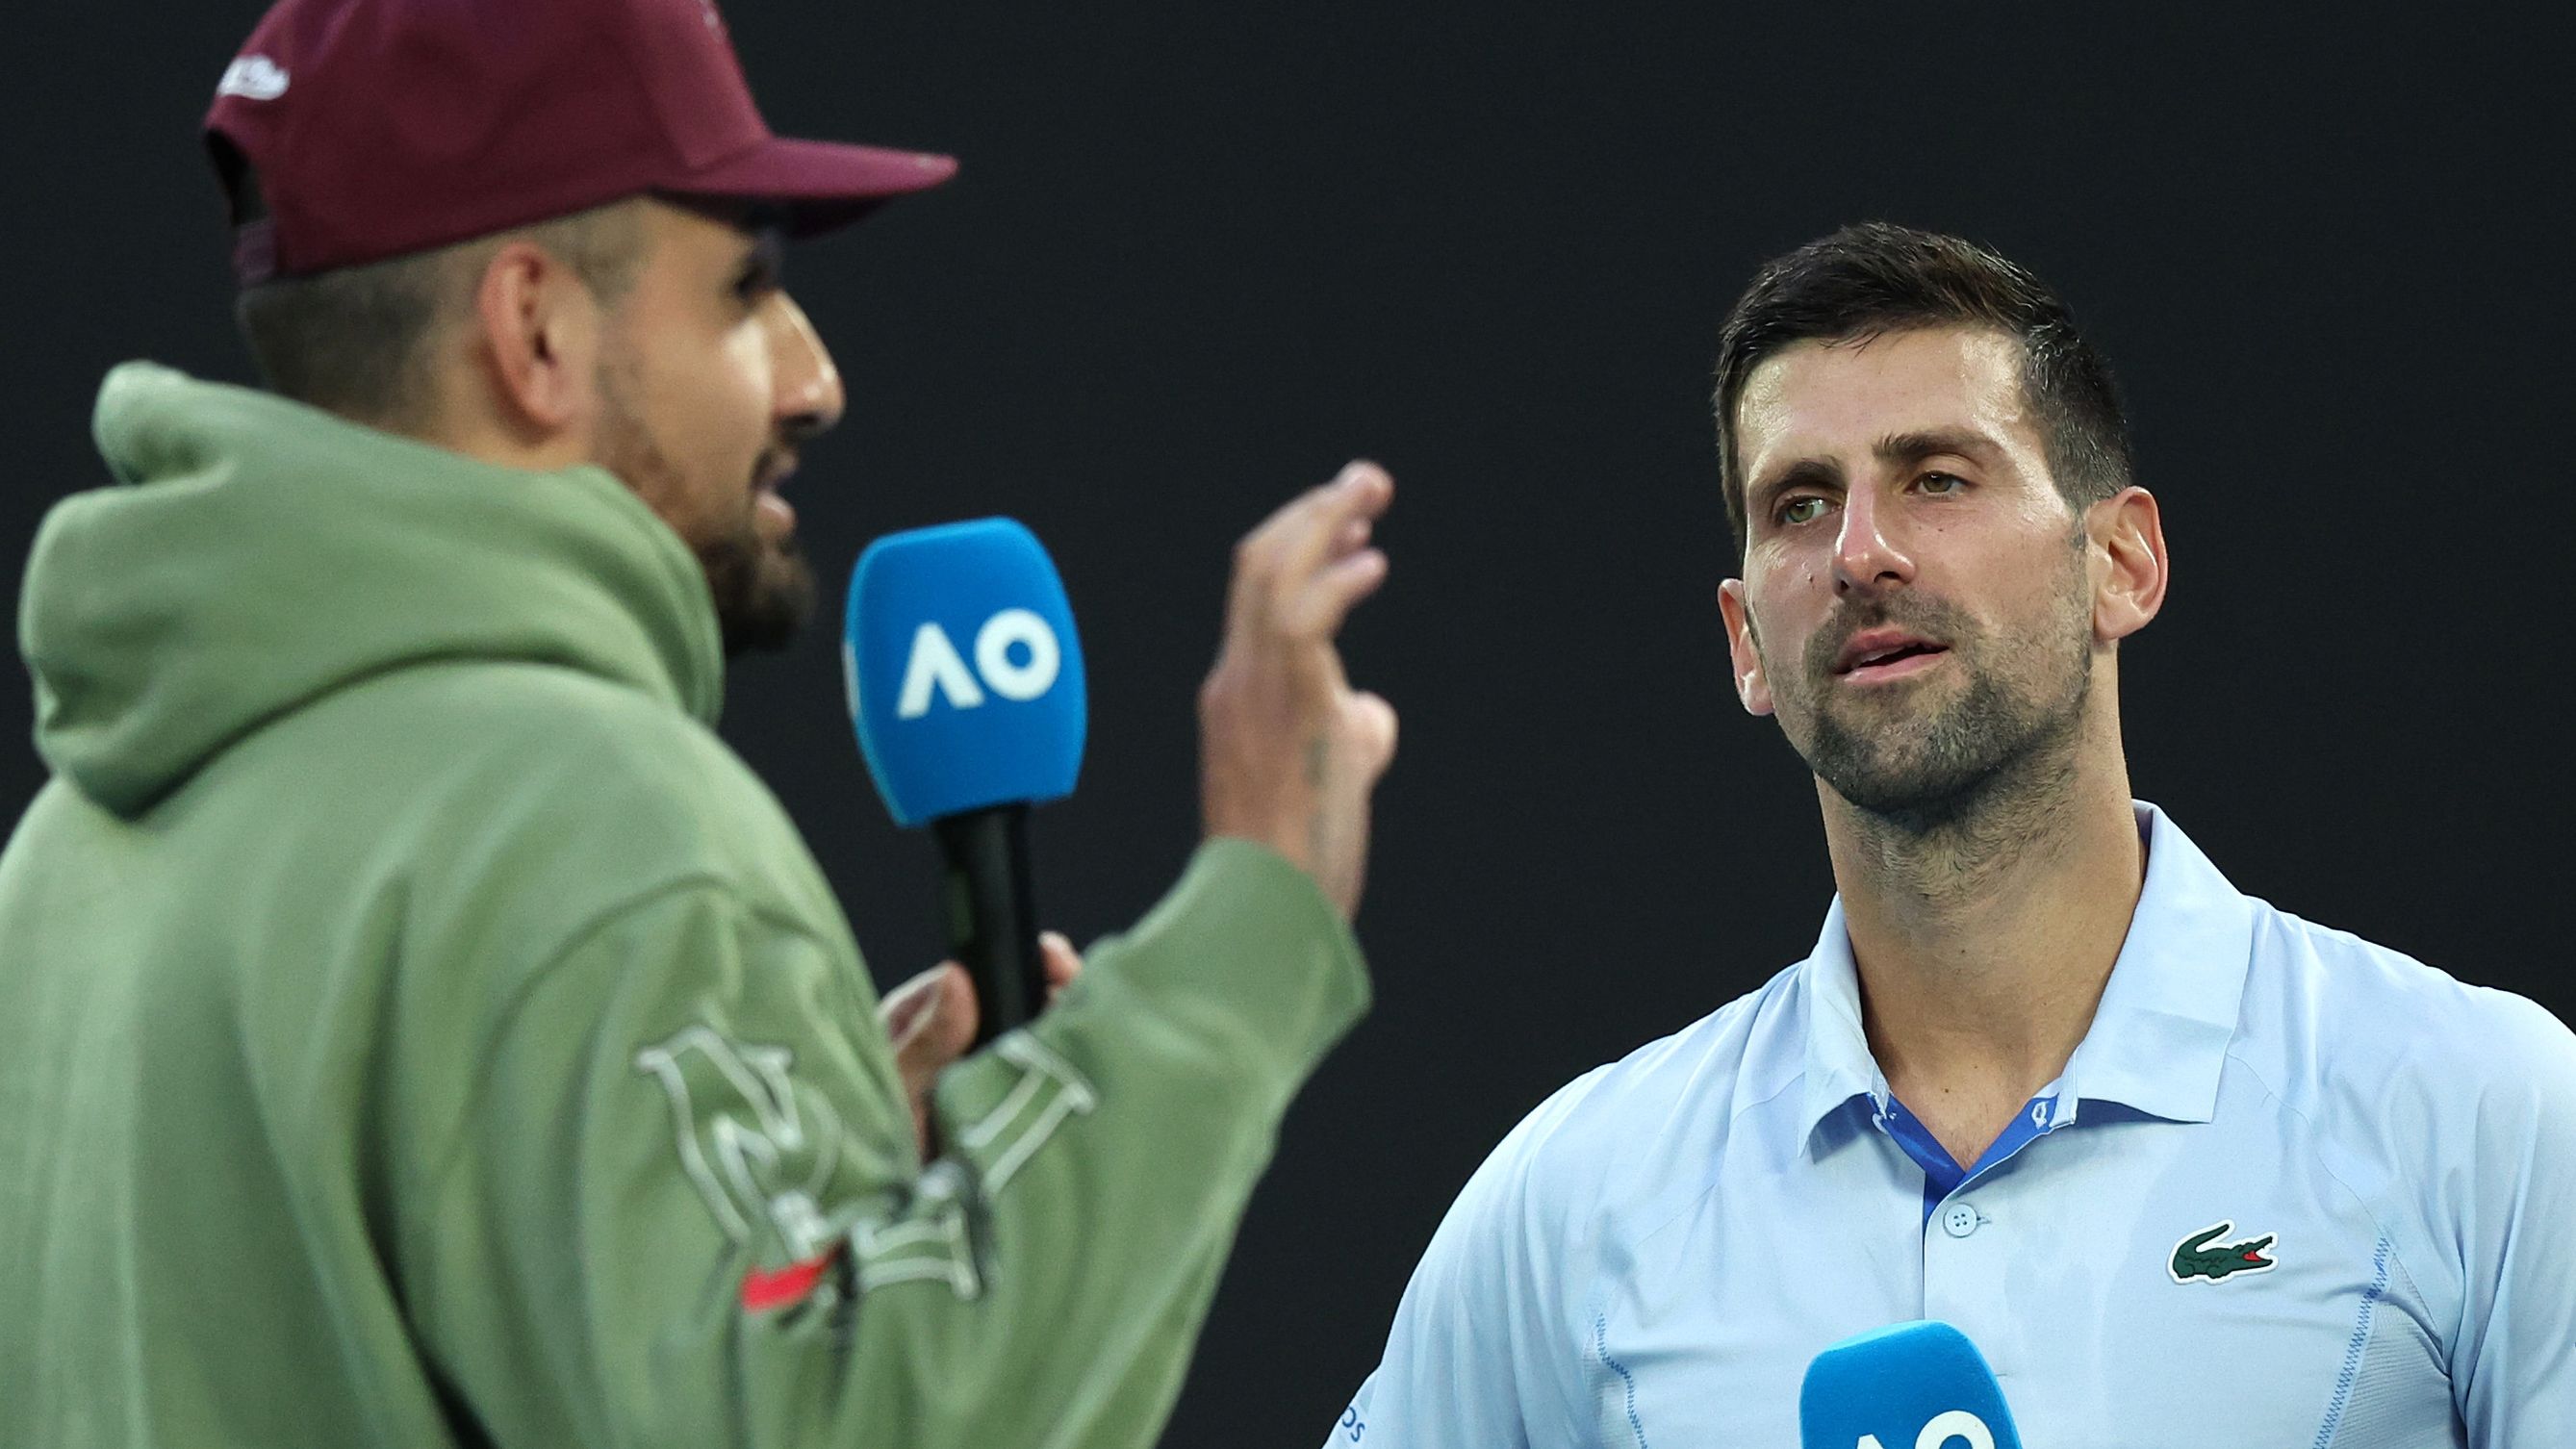 Novak Djokovic is interviewed by Nick Kyrgios after the quarter-final match against Taylor Fritz.